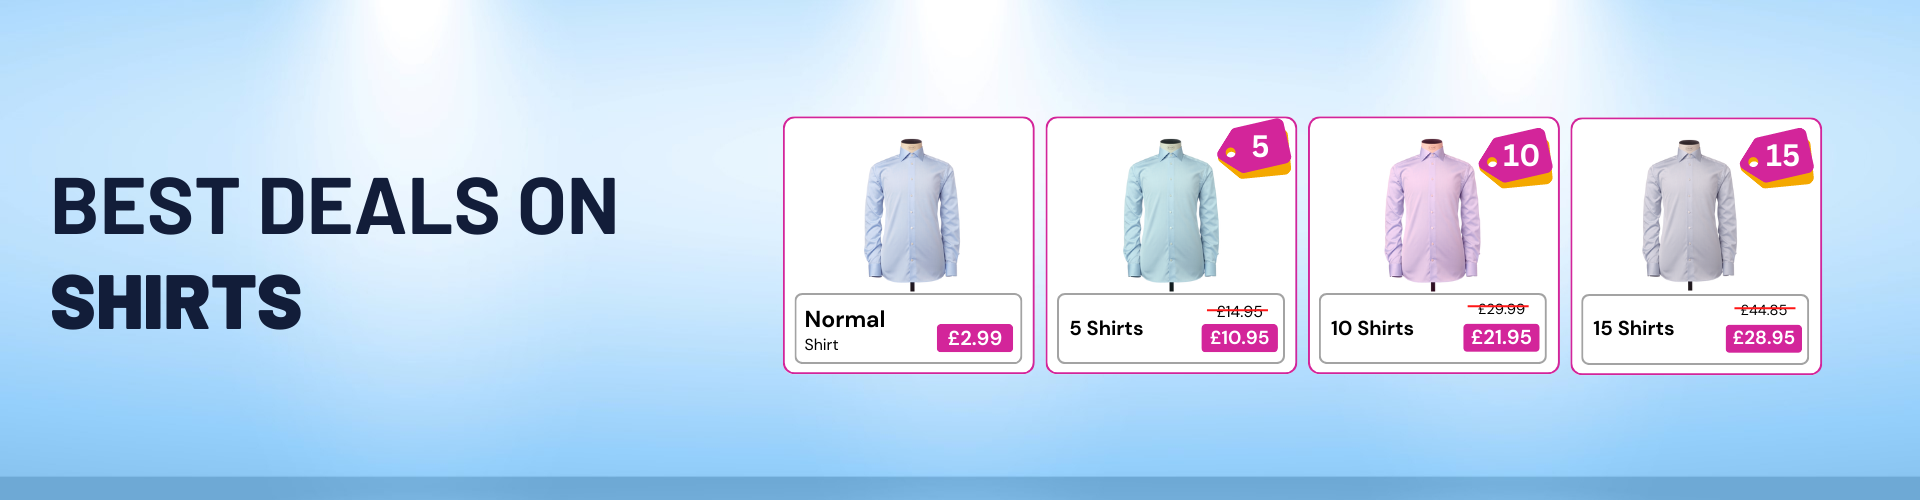 Canary Wharf Dry Cleaner Best Deals on Shirts